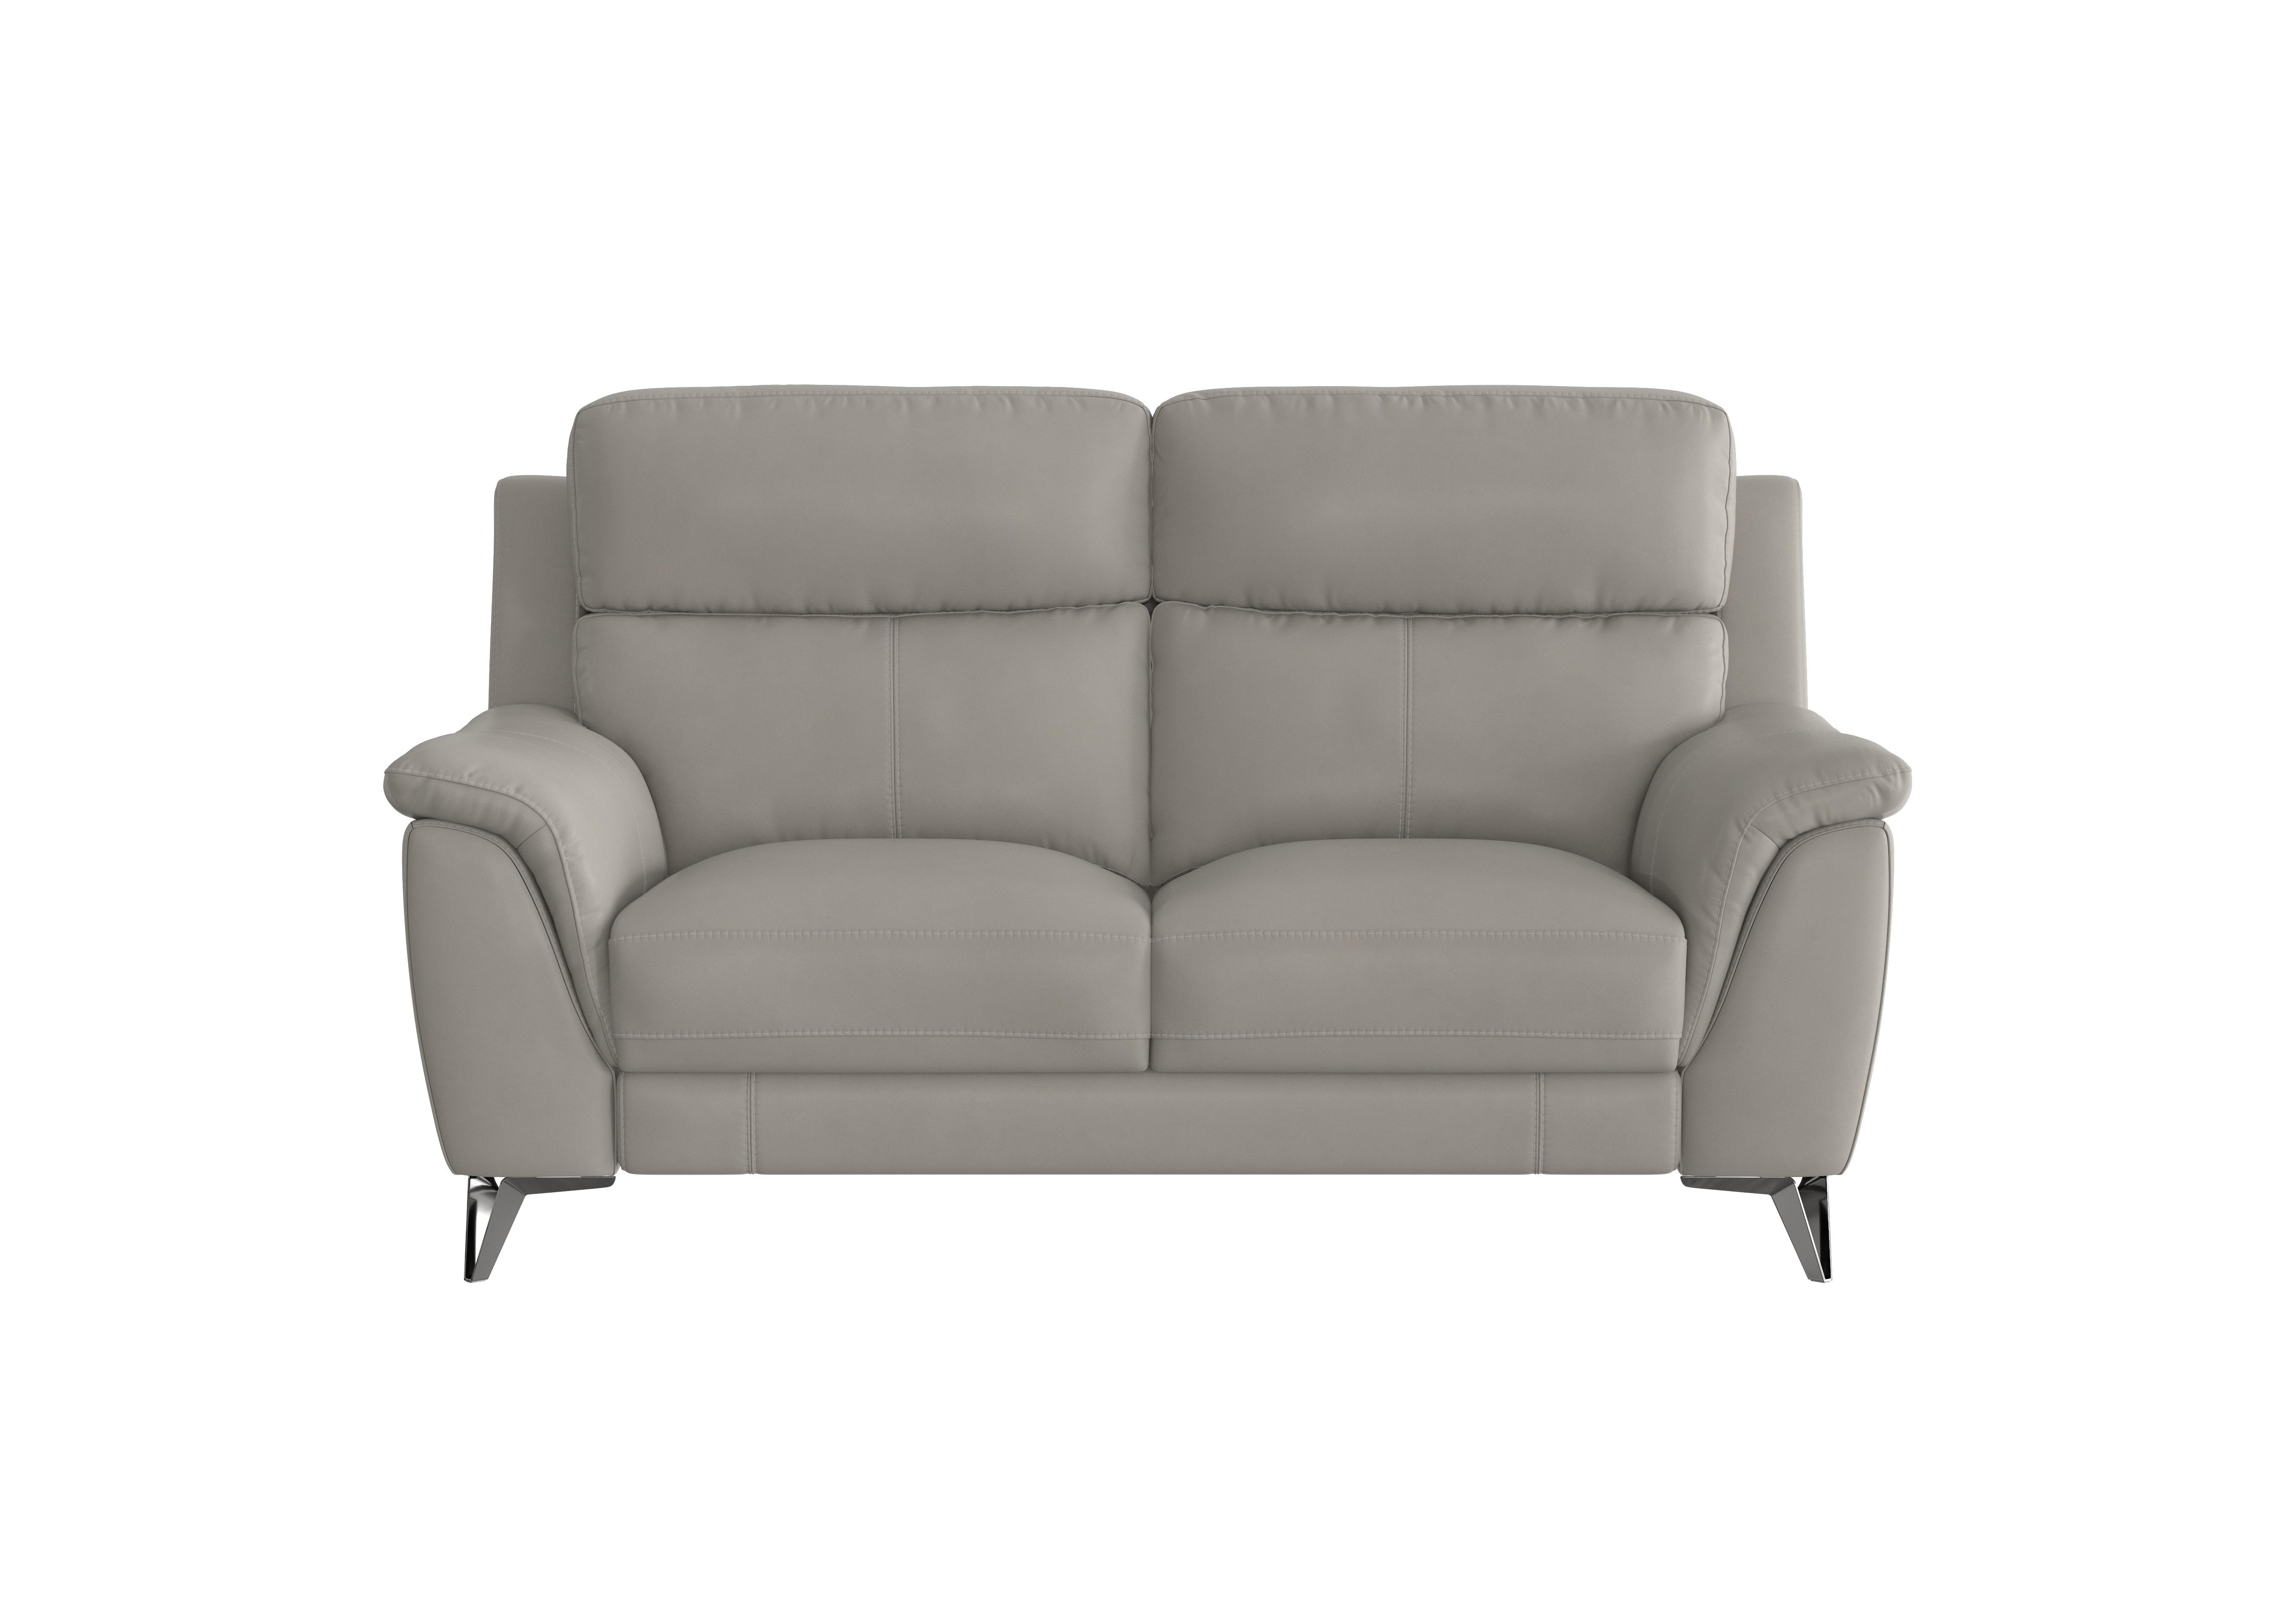 Contempo 2 Seater Leather Sofa in Bv-946b Silver Grey on Furniture Village